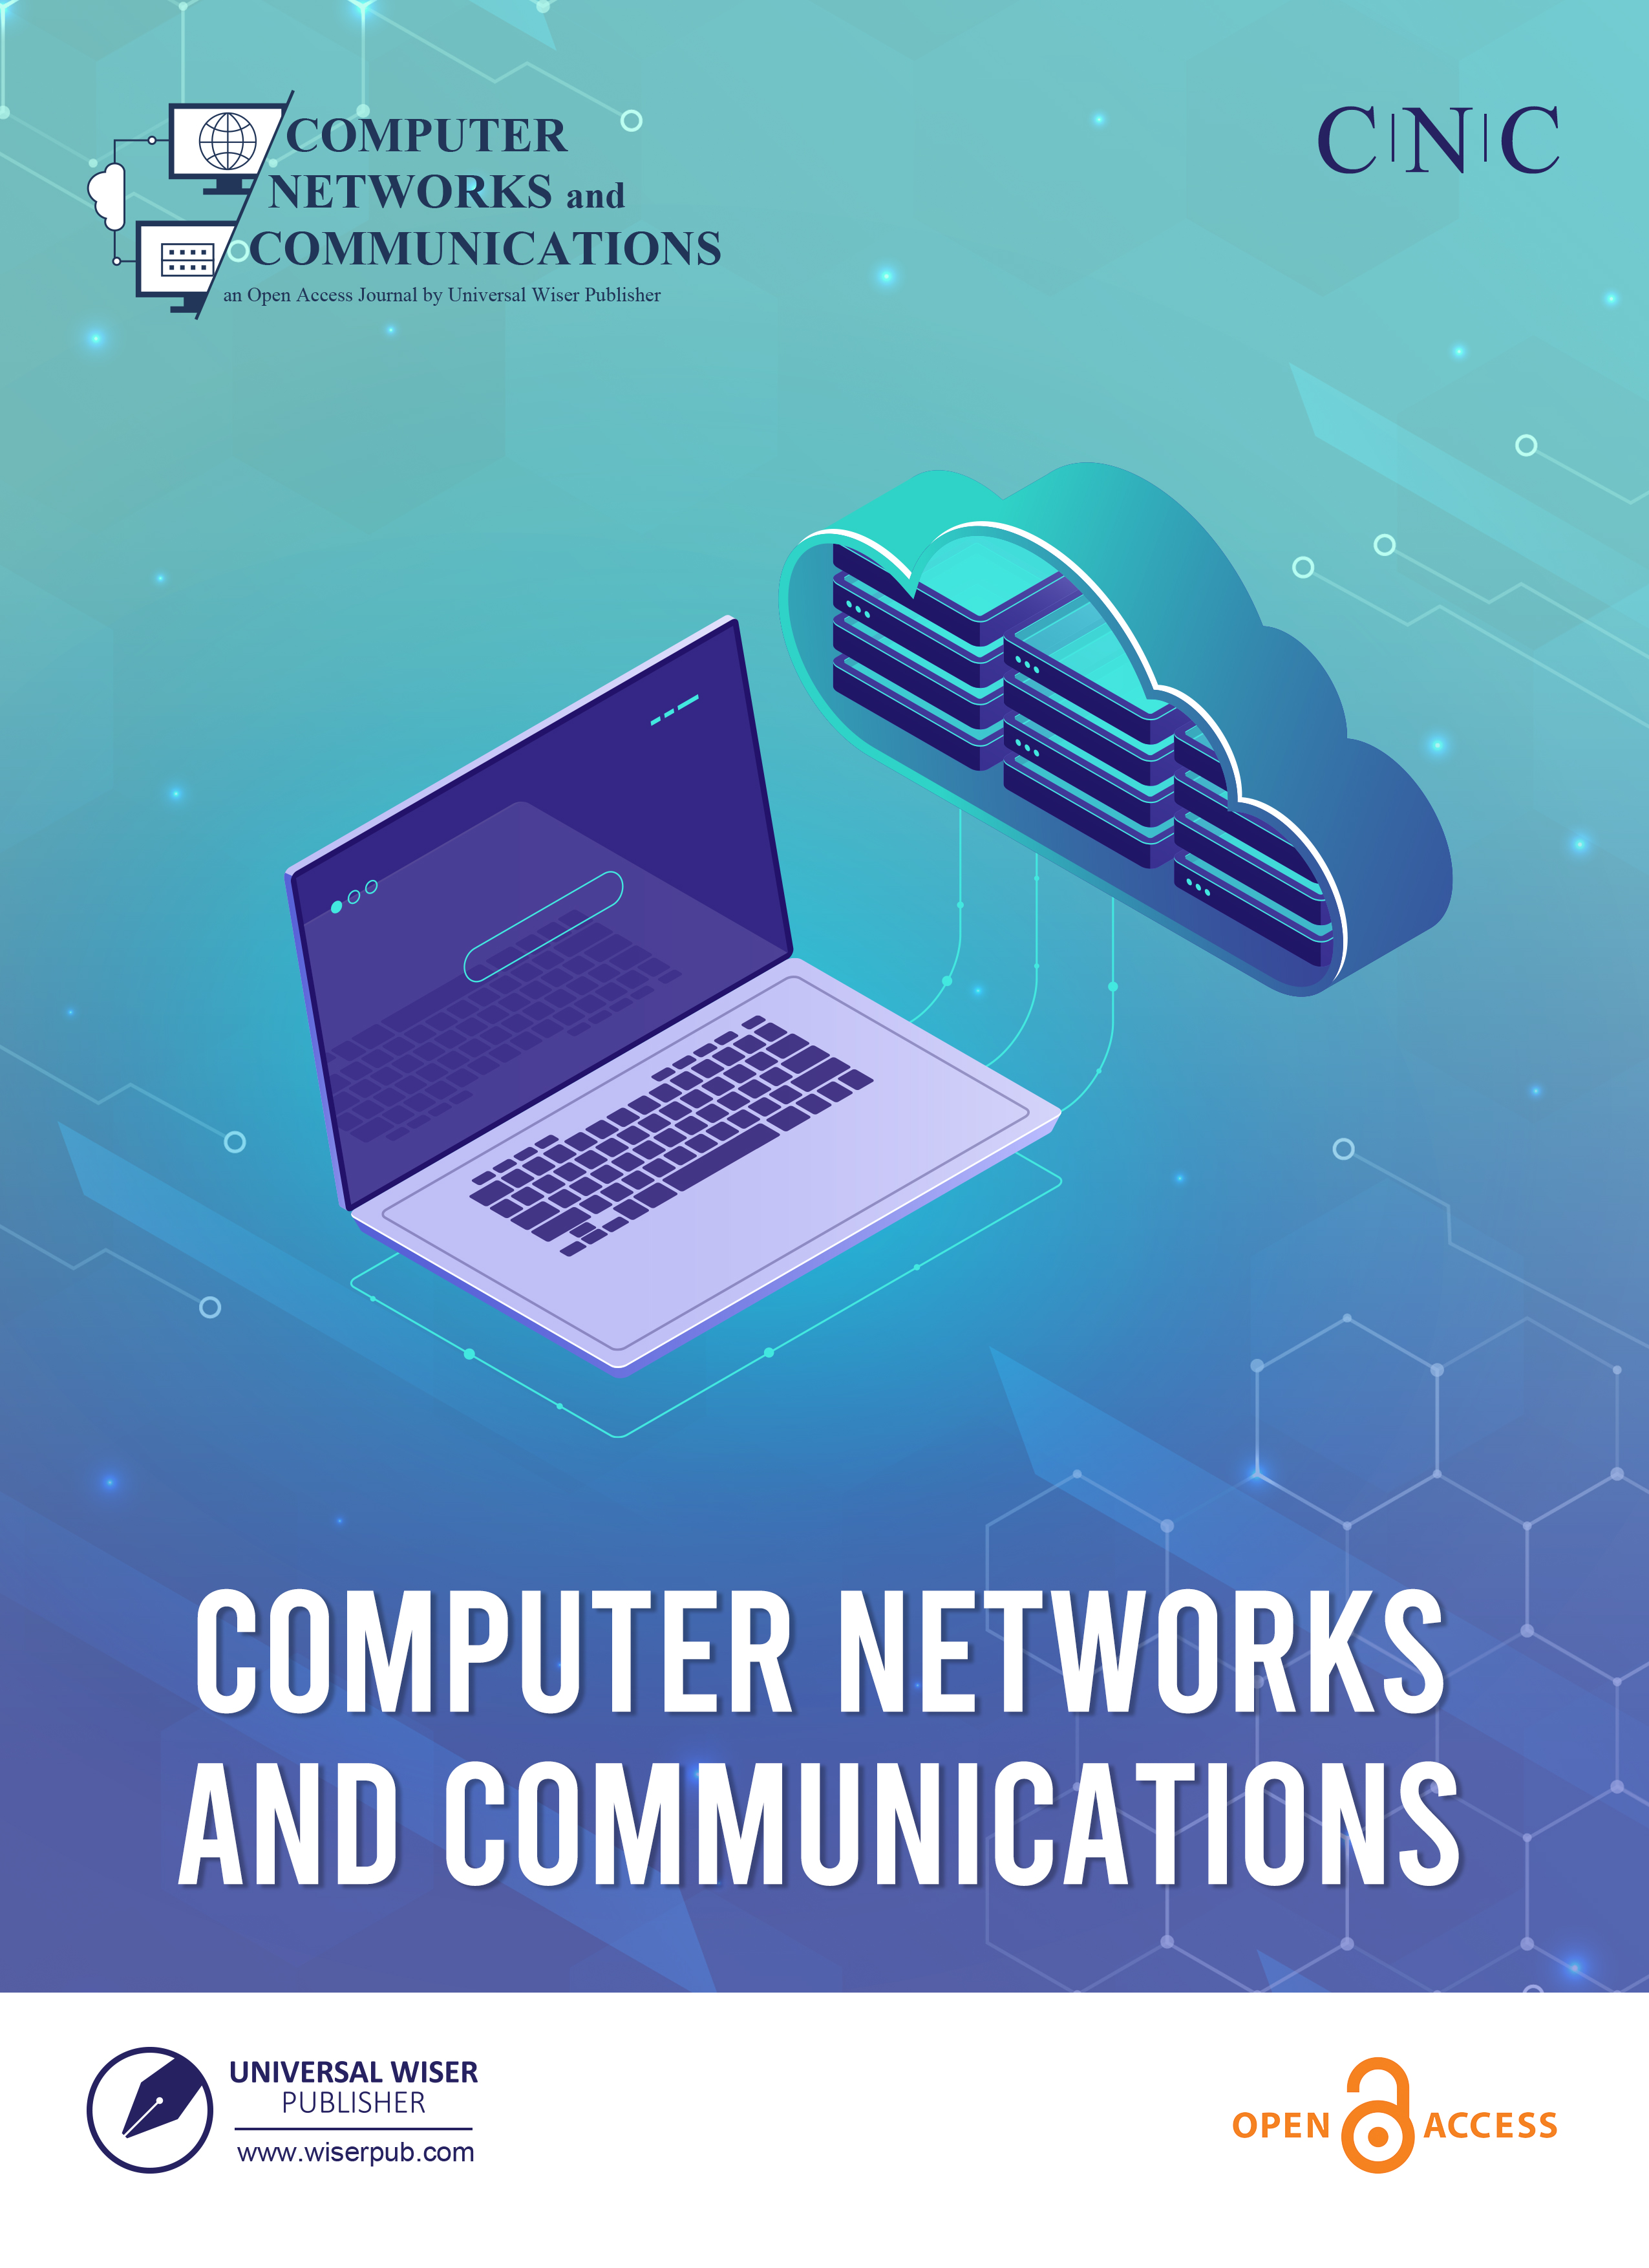 Computer Networks and Communications